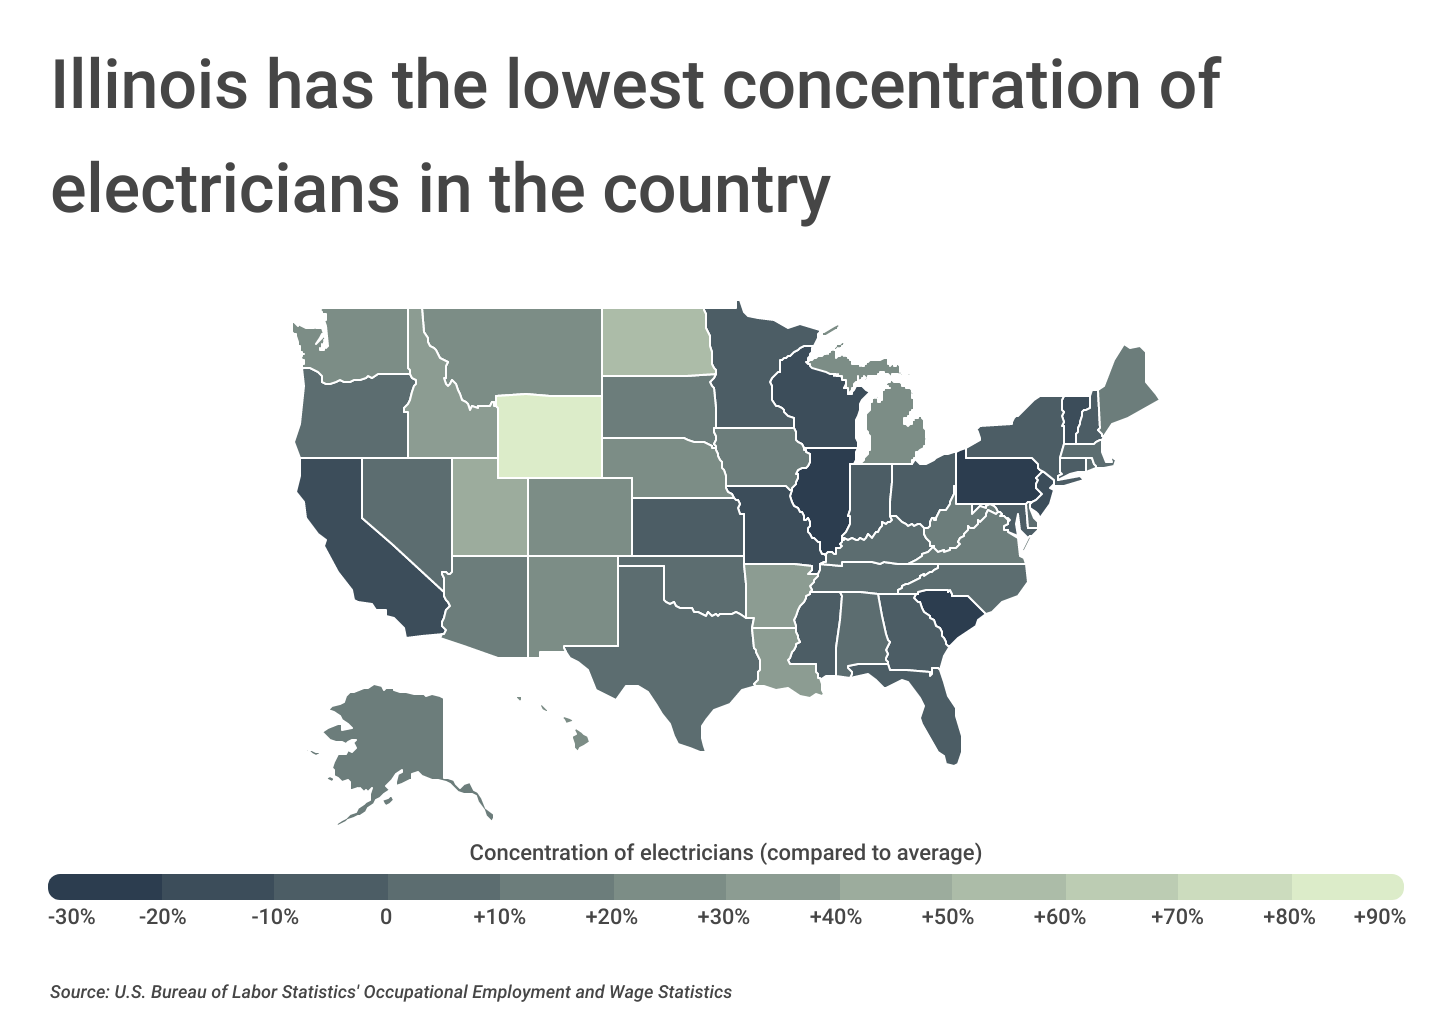 Chart3_IL has the lowest concentration of electricians in the country